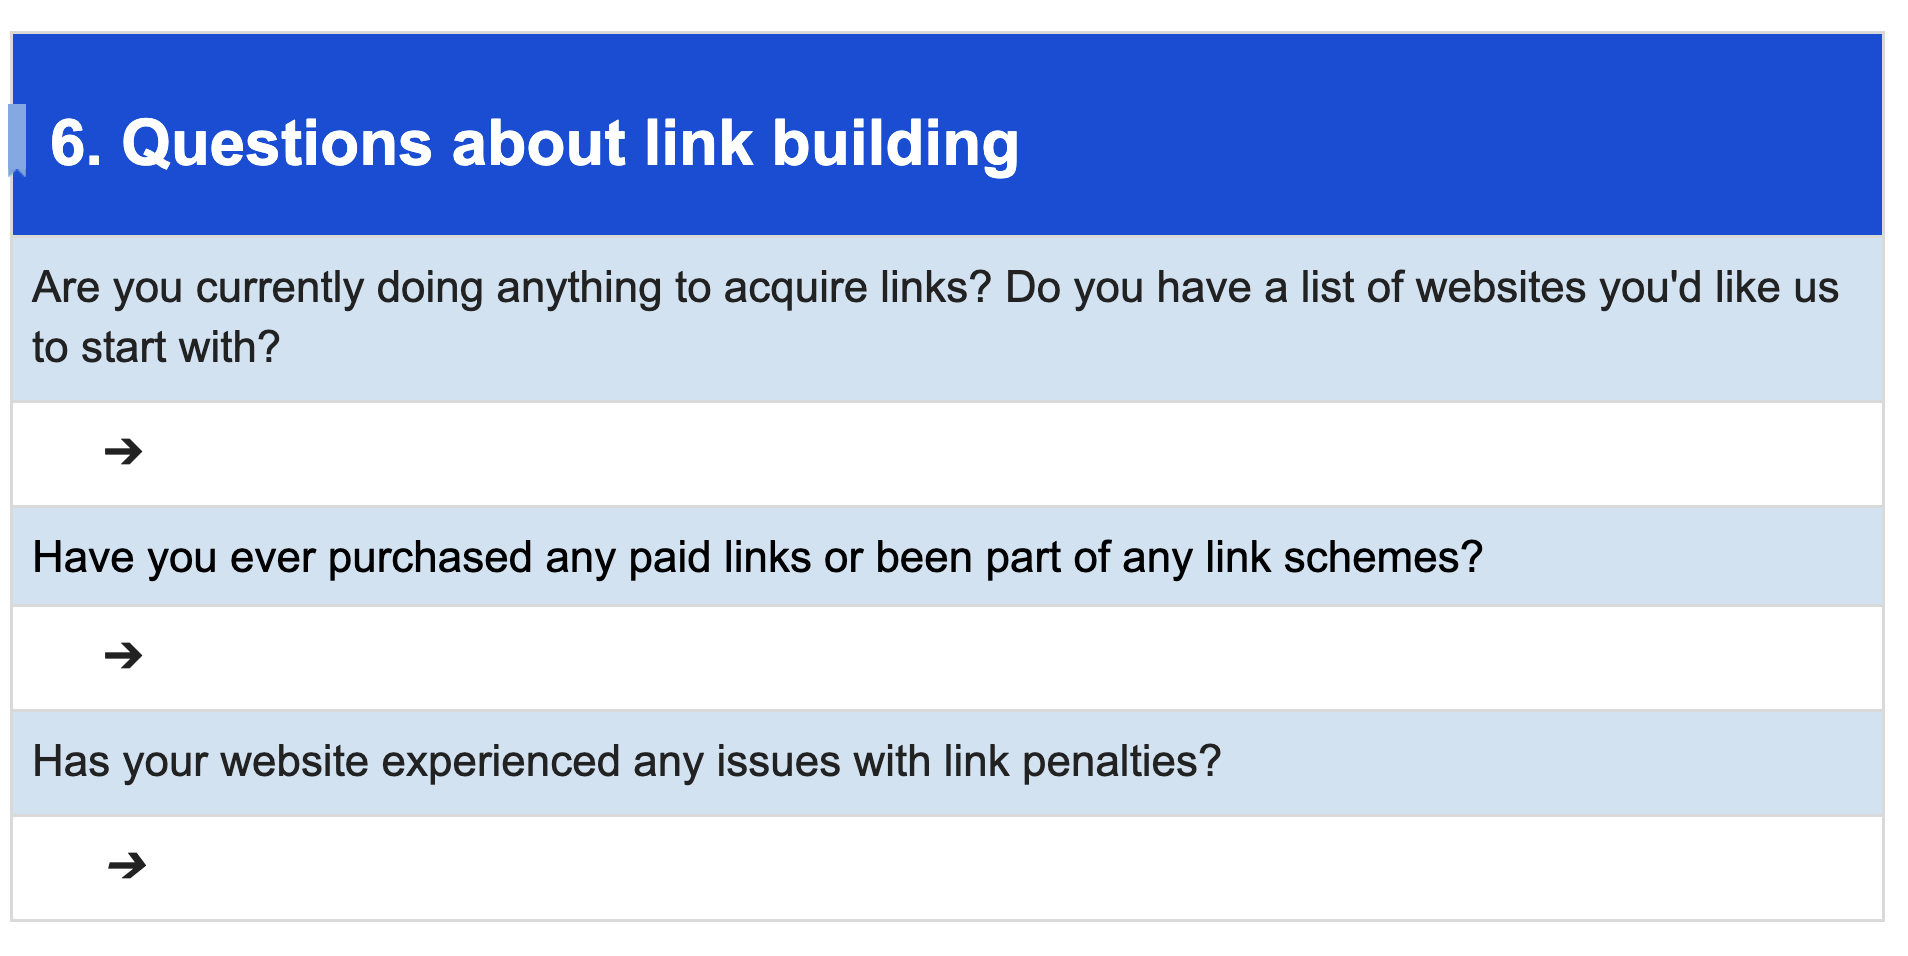 Questions about link building